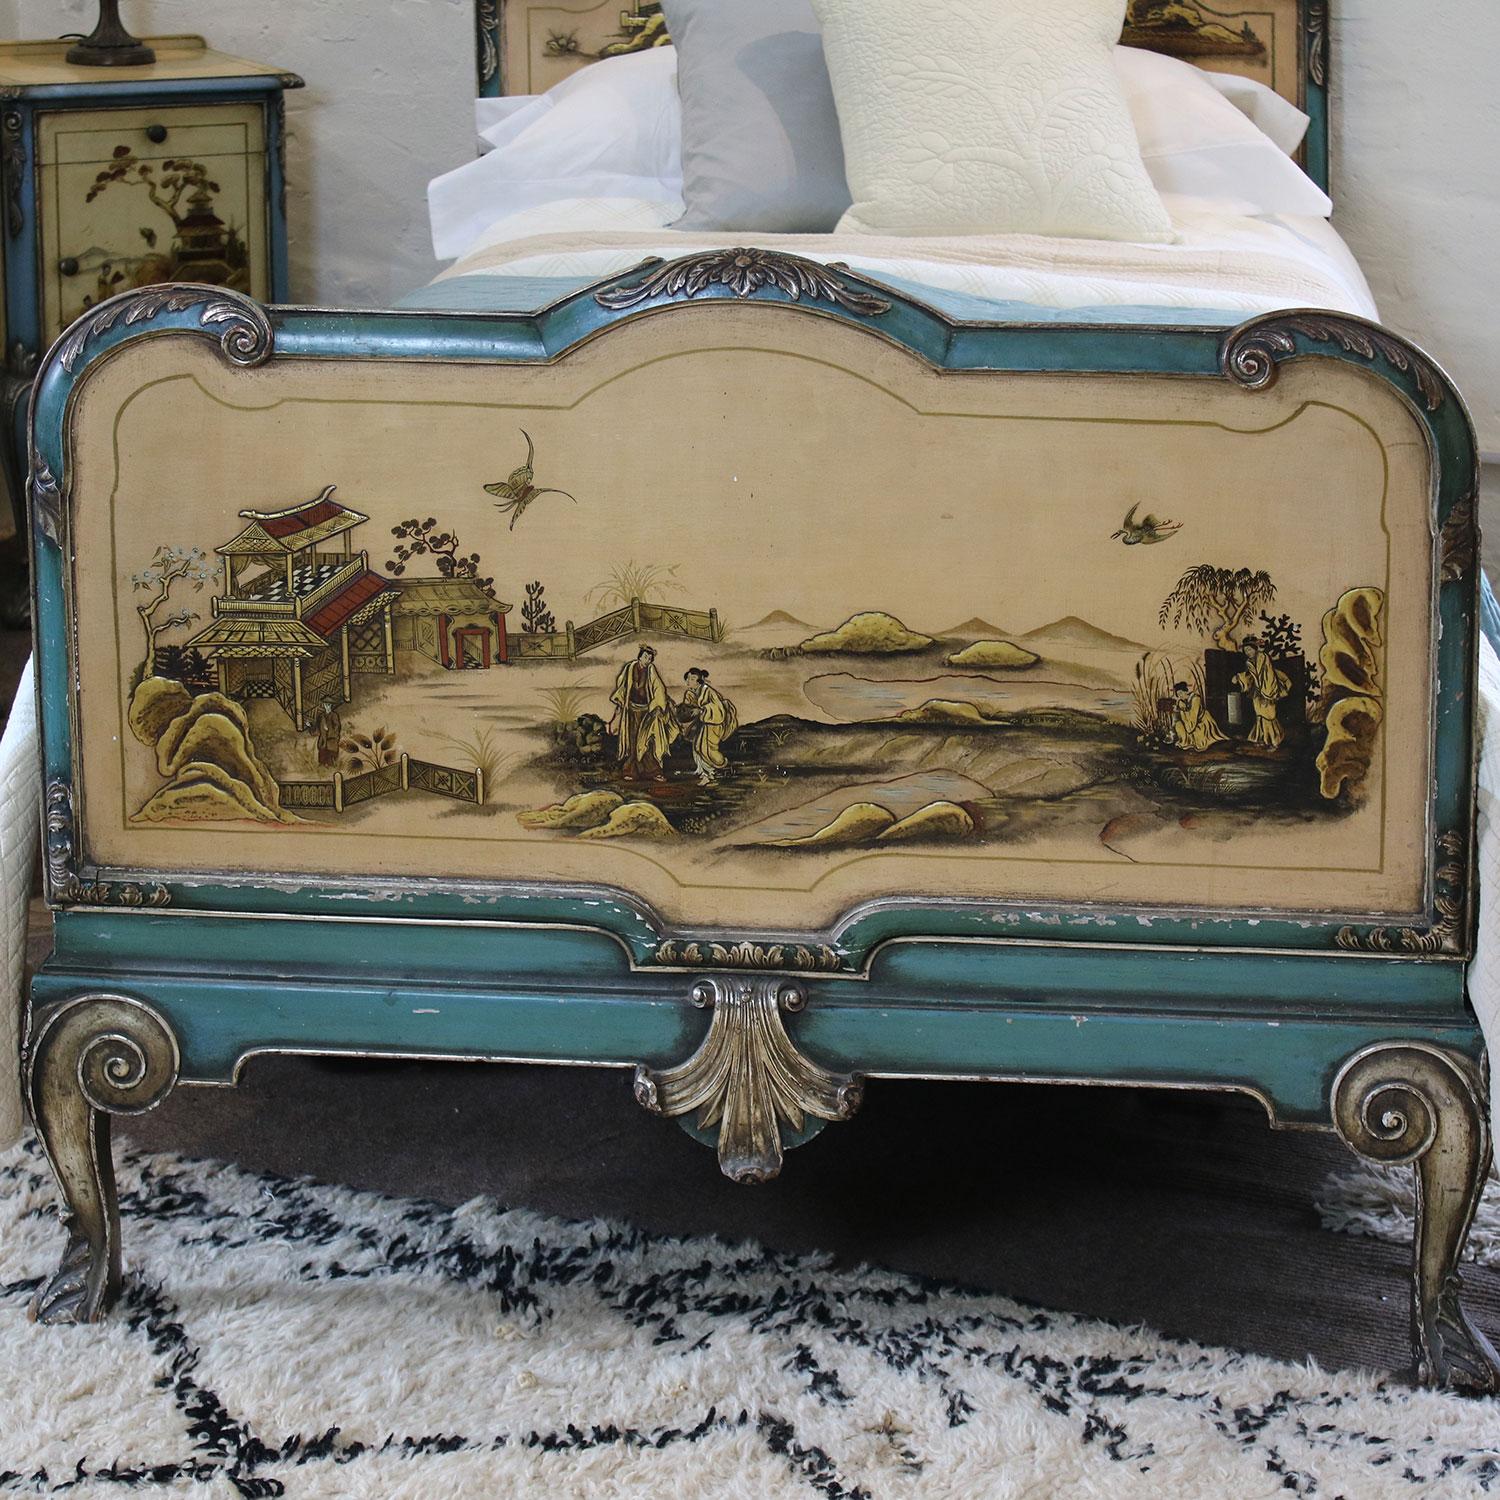 A fabulous Chinoiserie decorated bedroom suite consisting of large single bed, bedside cabinet, dressing table and mirror.

The quality of the painting and the detail of the scenes are superb.

The bed accepts a large single base and mattress